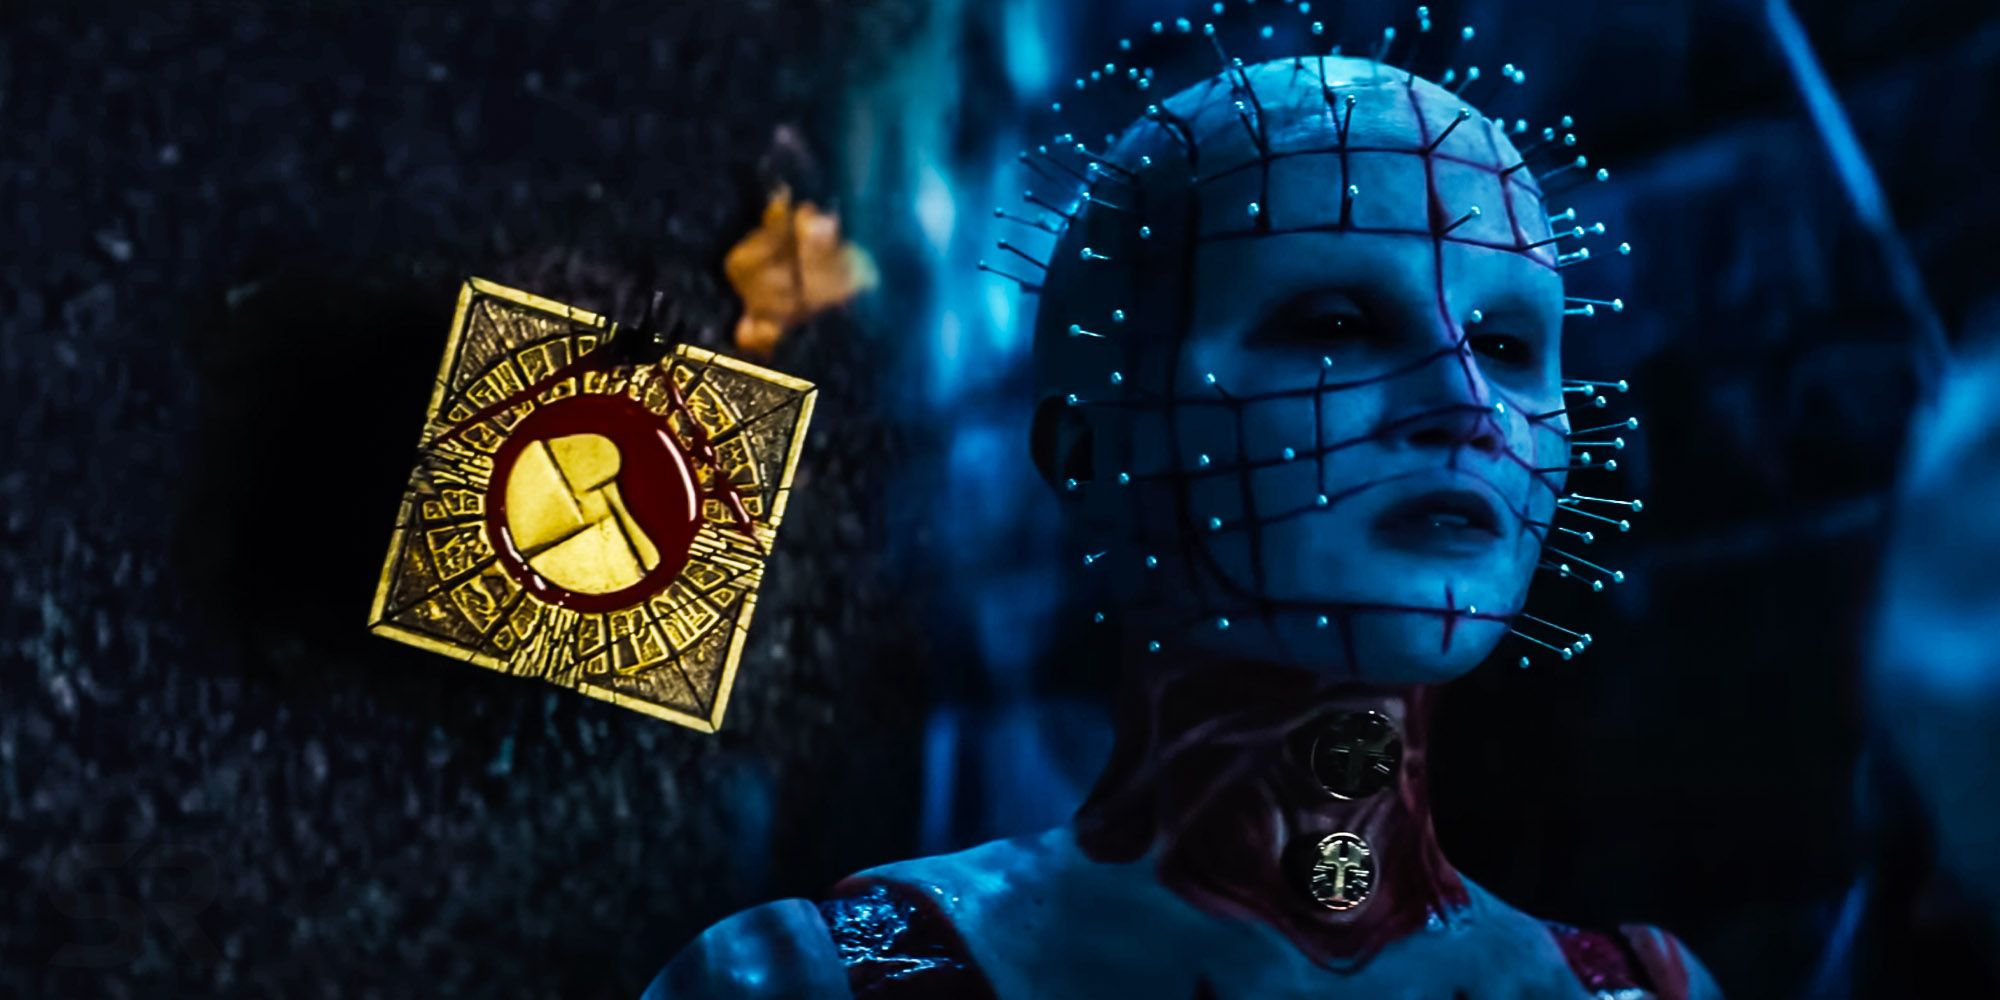 Jamie Clayton as Priest and the box puzzle in Hulu Hellraiser's ending.